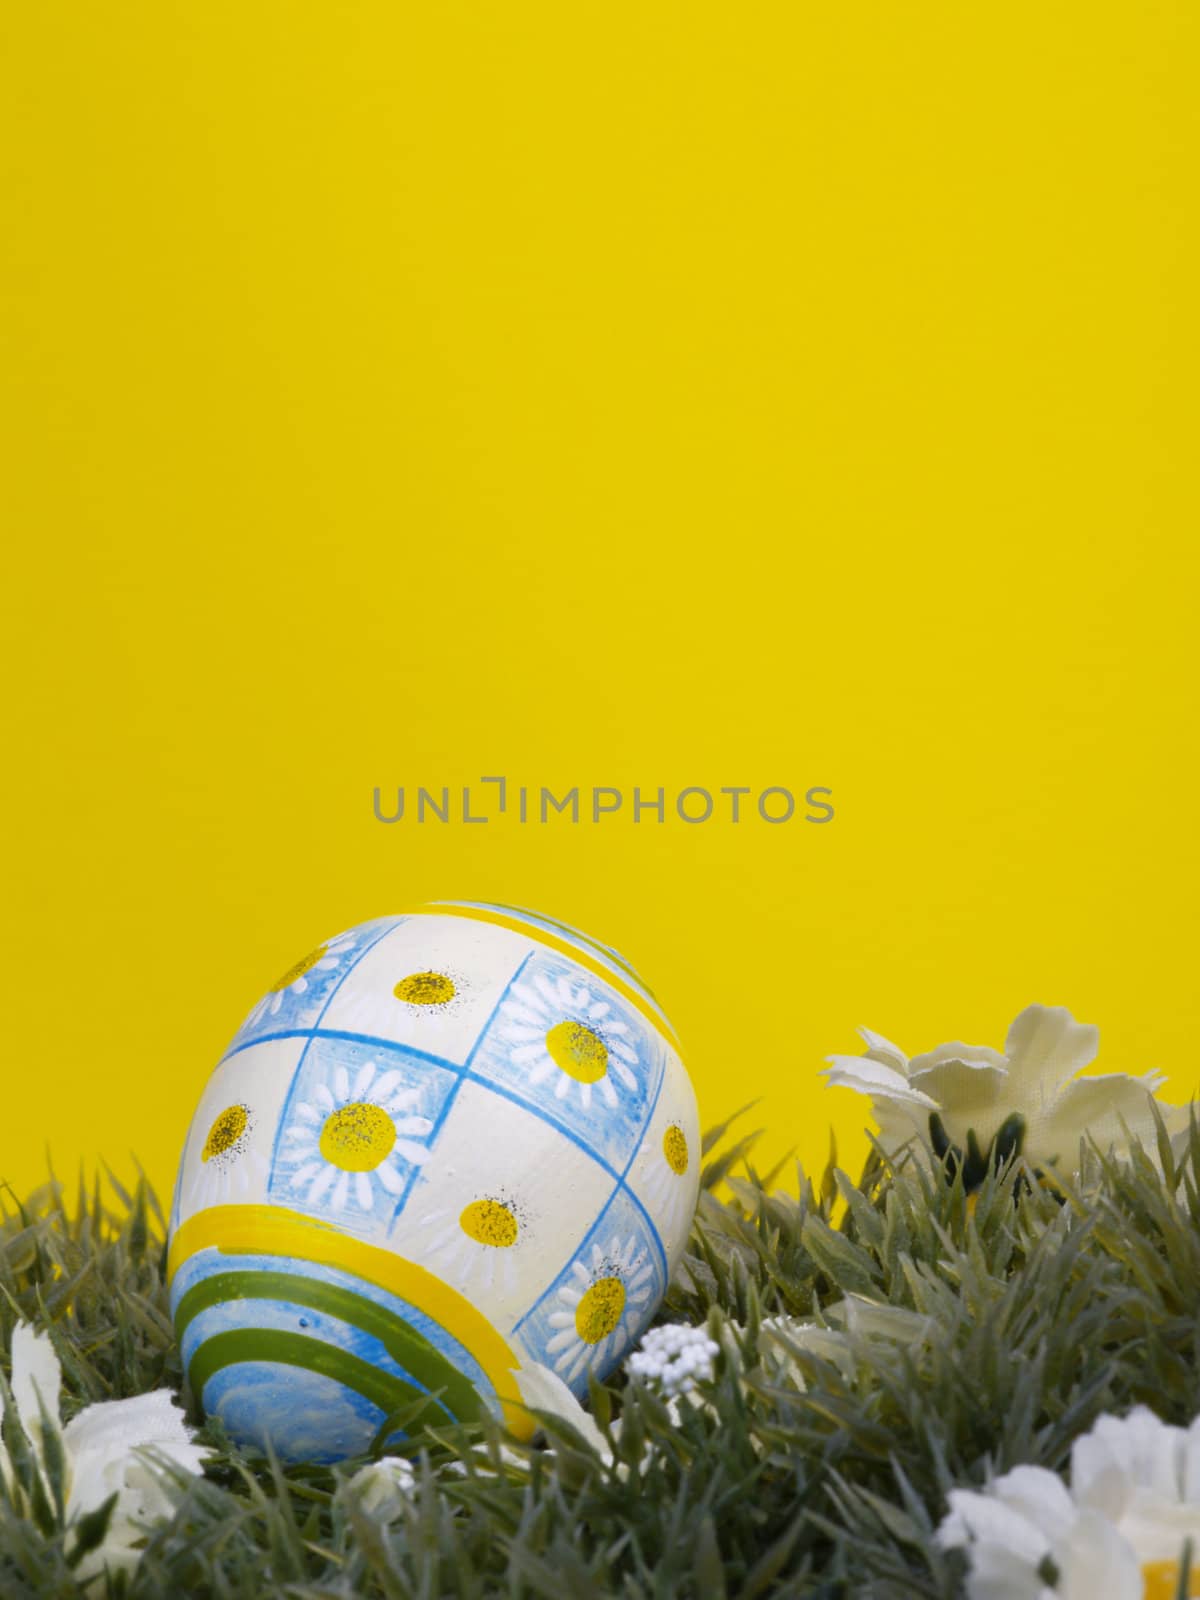 handpainted daisy design on easter egg, artificial grass and blossoms, yellow background